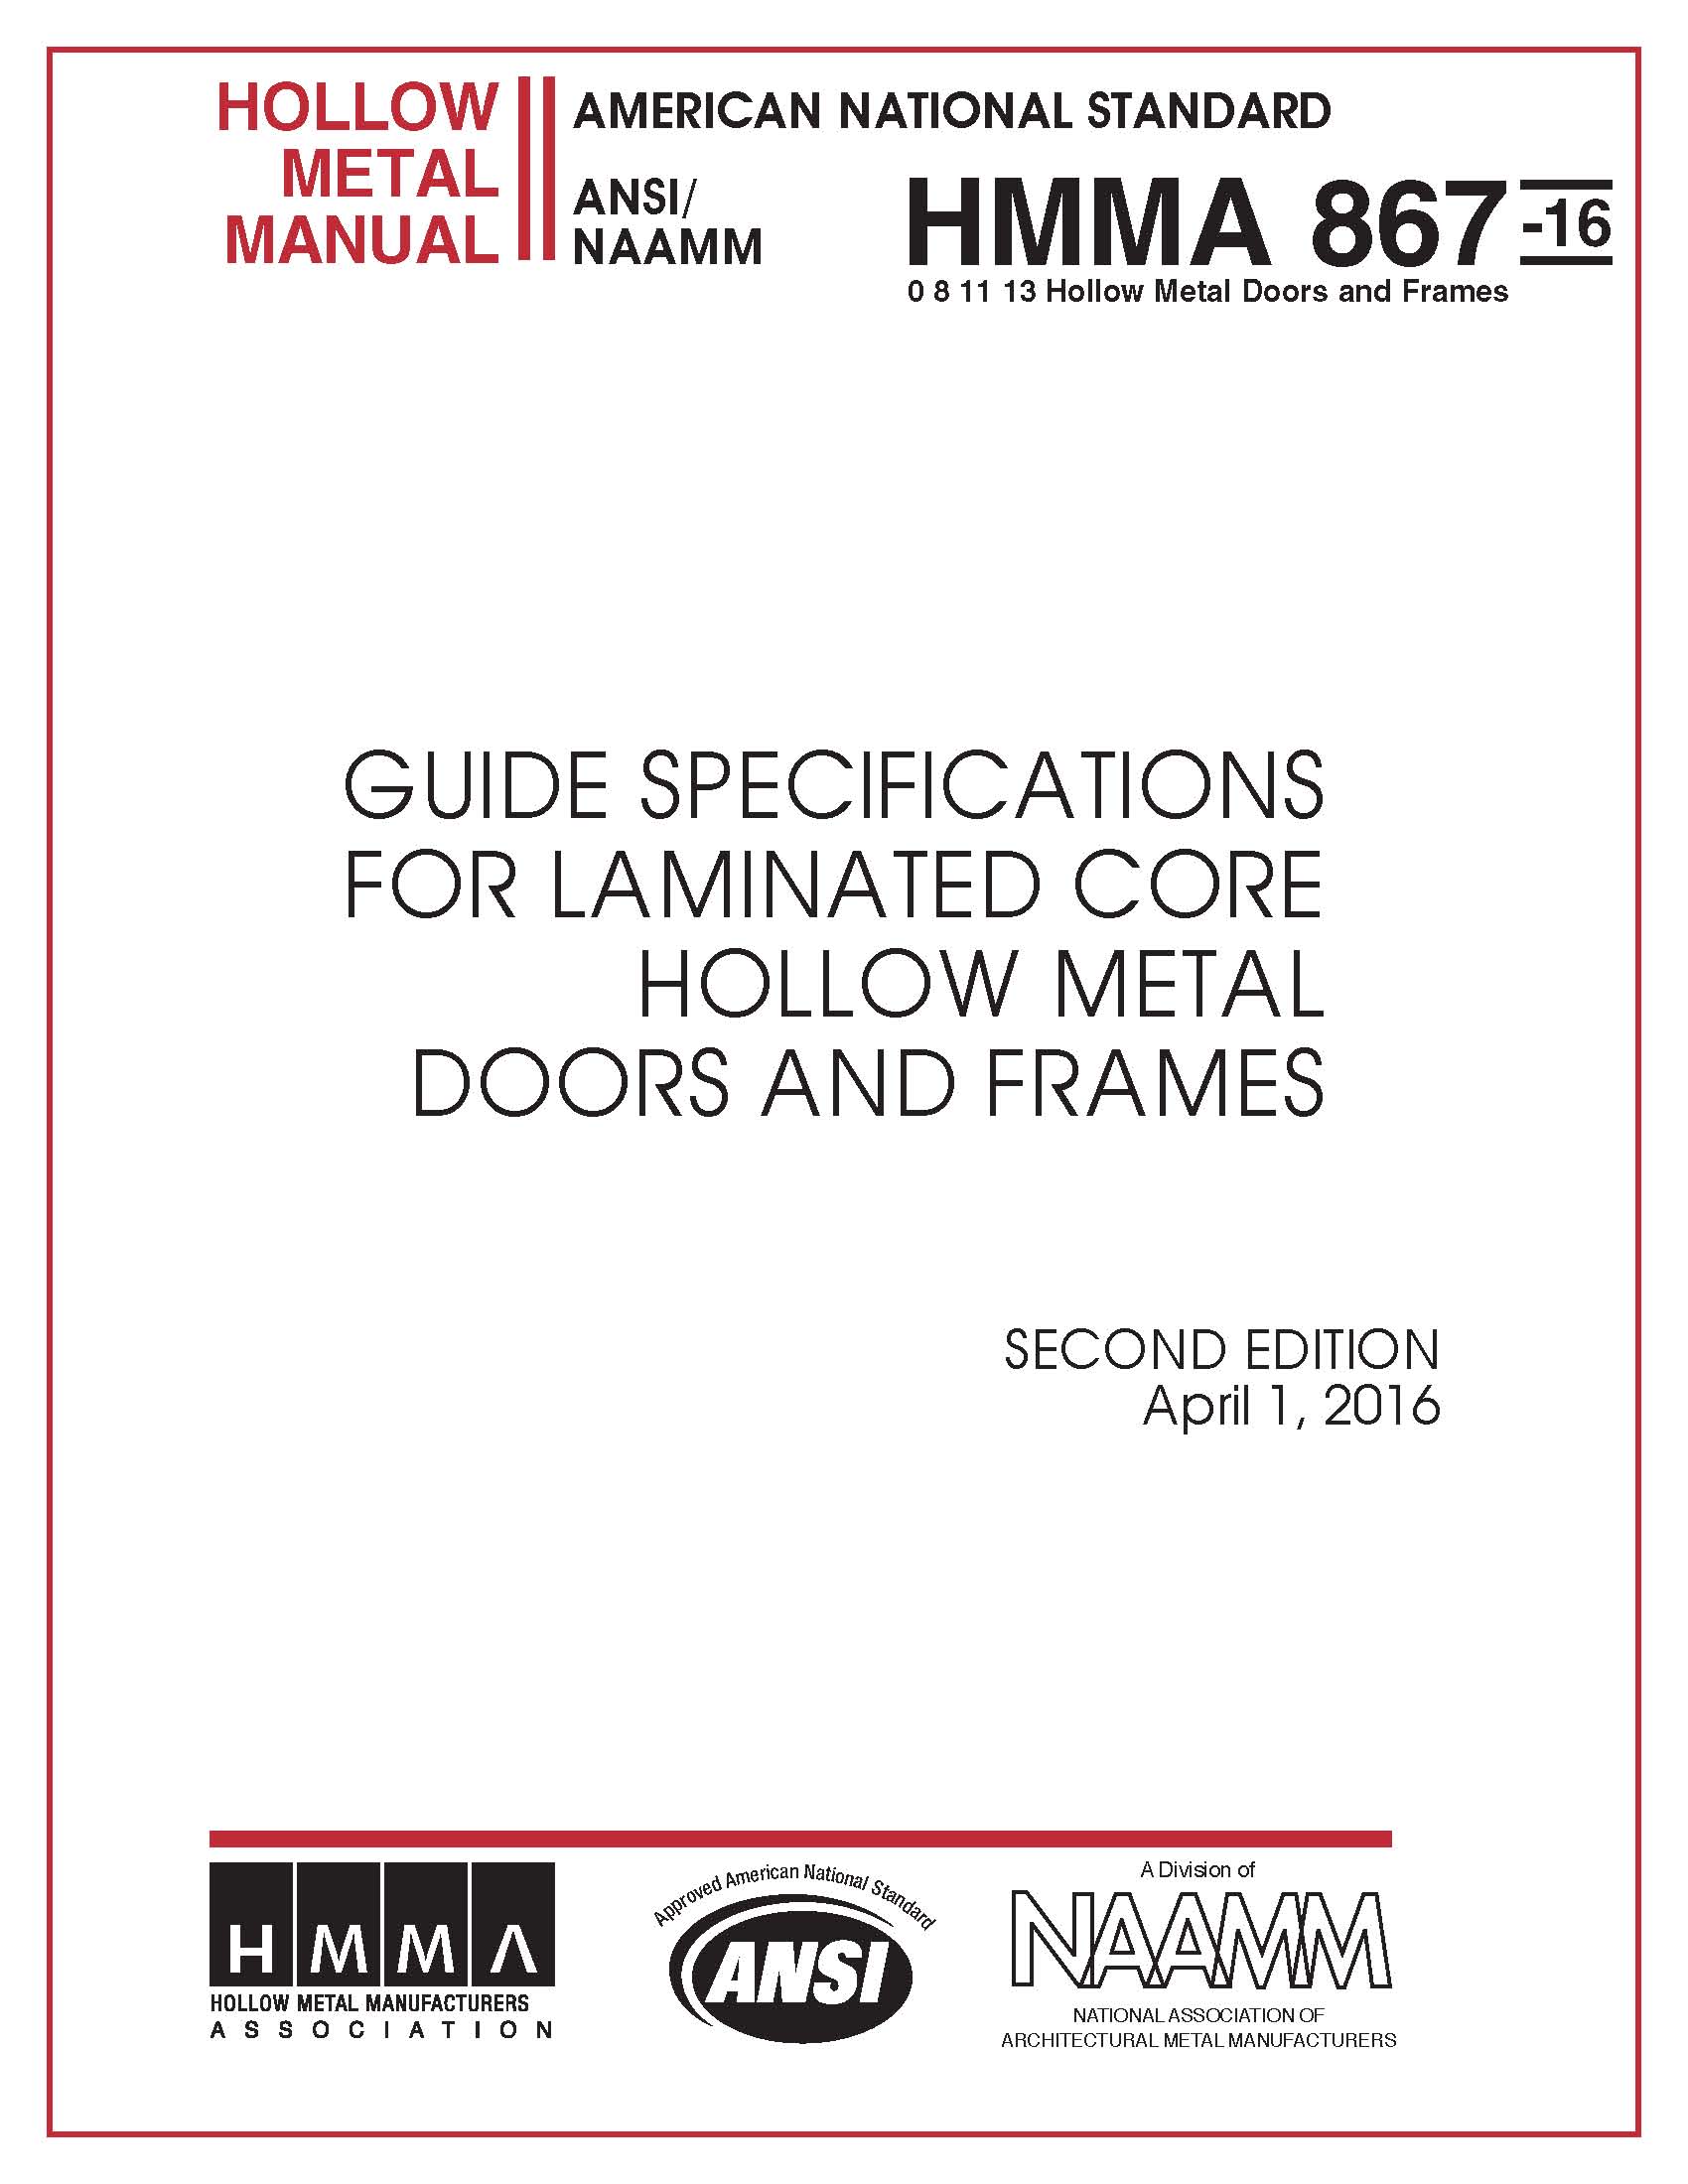 Guide Specifications for Commercial Laminated Core Hollow Metal Doors and Frames